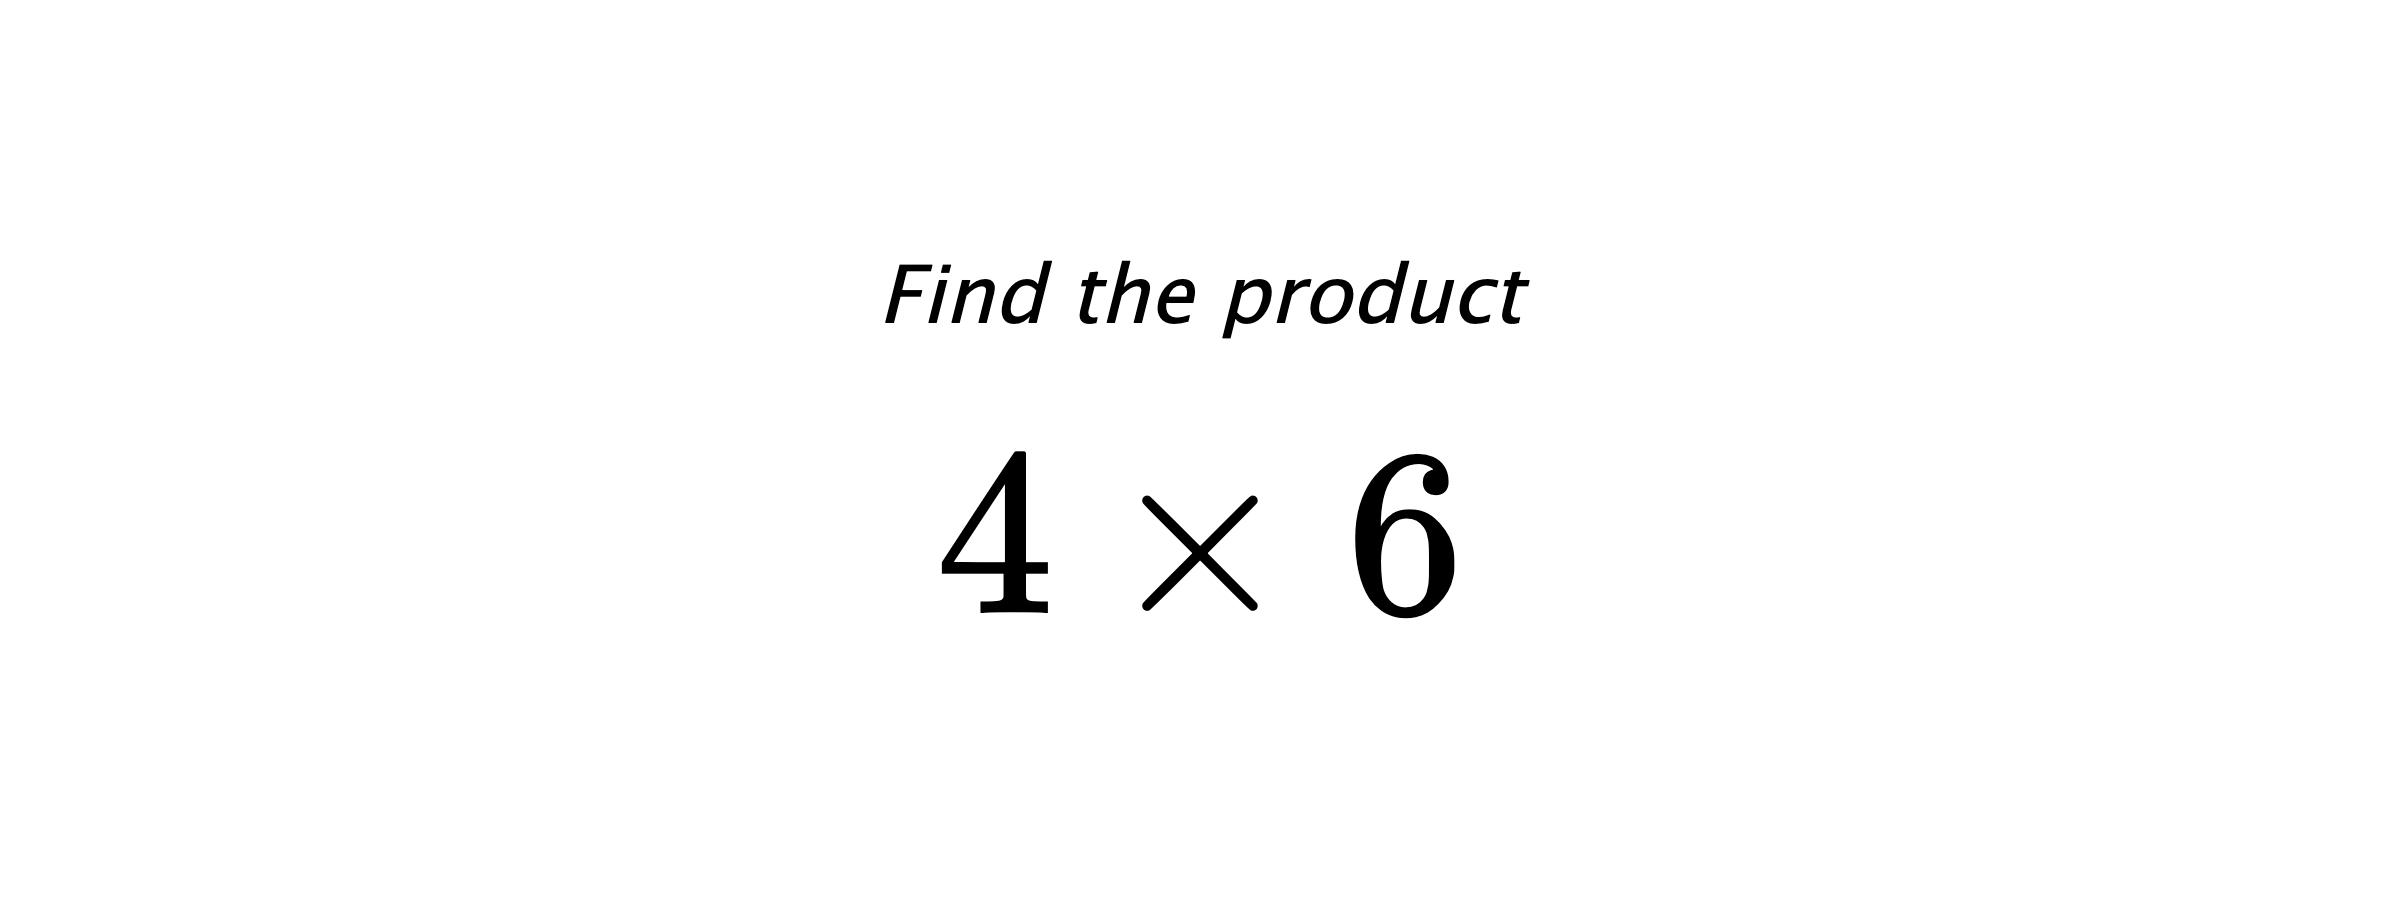 Find the product $ 4 \times 6 $